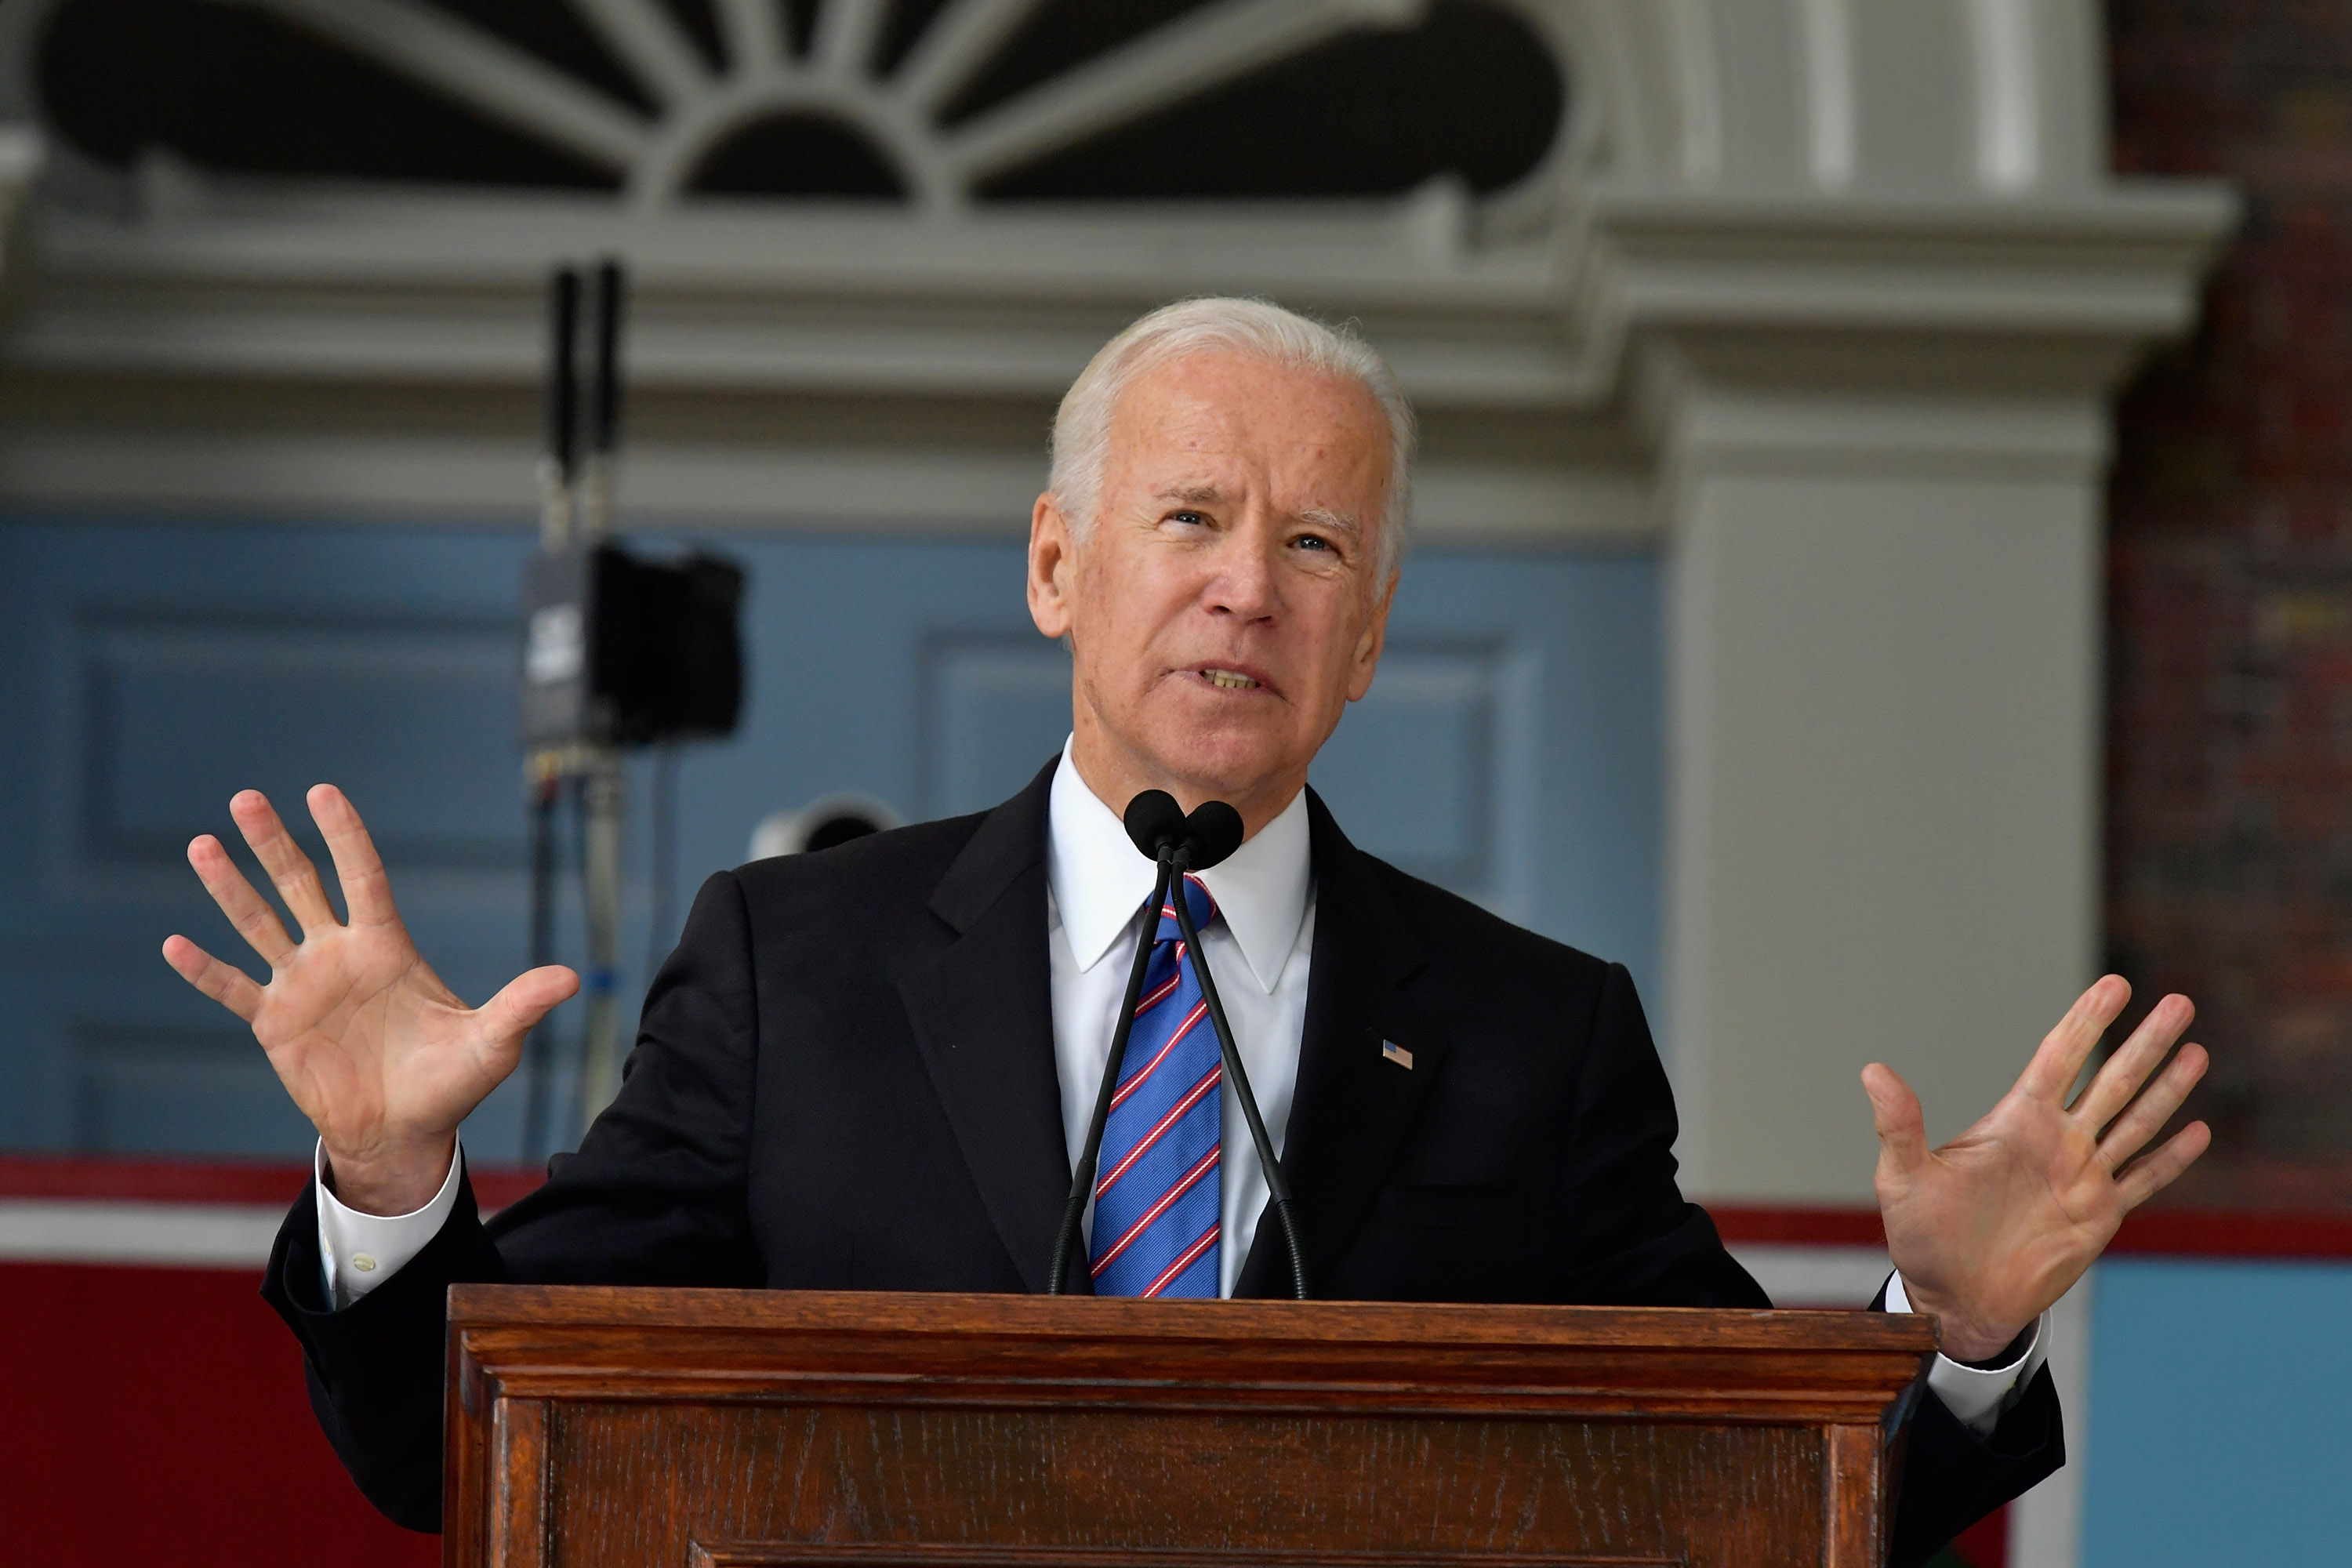 CAMBRIDGE, MA - MAY 24:  Former Vice President Joseph Biden speaks at the Harvard College Class of 2017 Class Day Exercises at Harvard University (Paul Marotta&mdash;Getty Images)